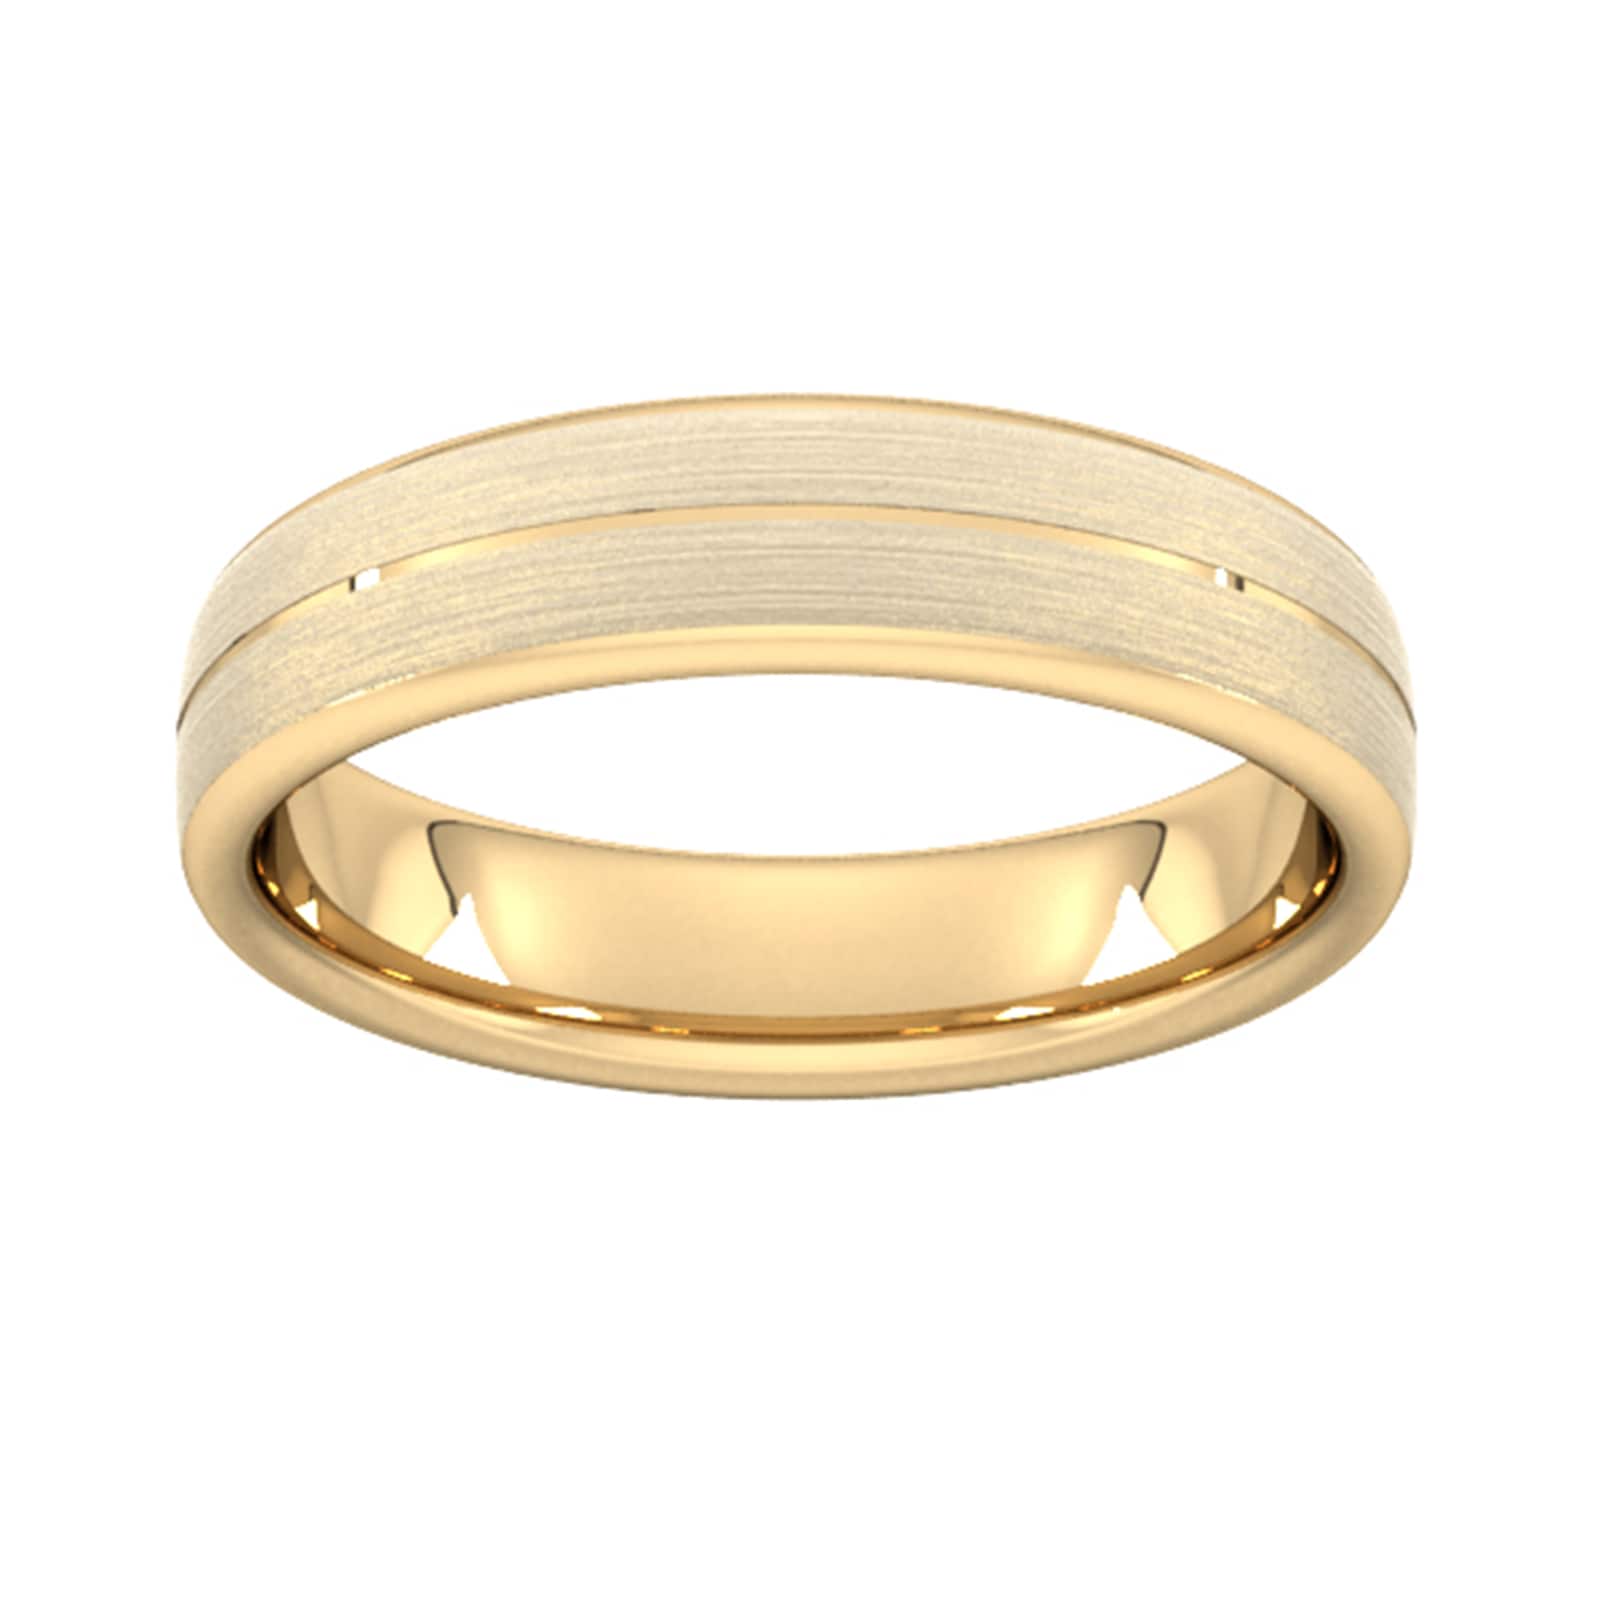 5mm Flat Court Heavy Centre Groove With Chamfered Edge Wedding Ring In 9 Carat Yellow Gold - Ring Size S